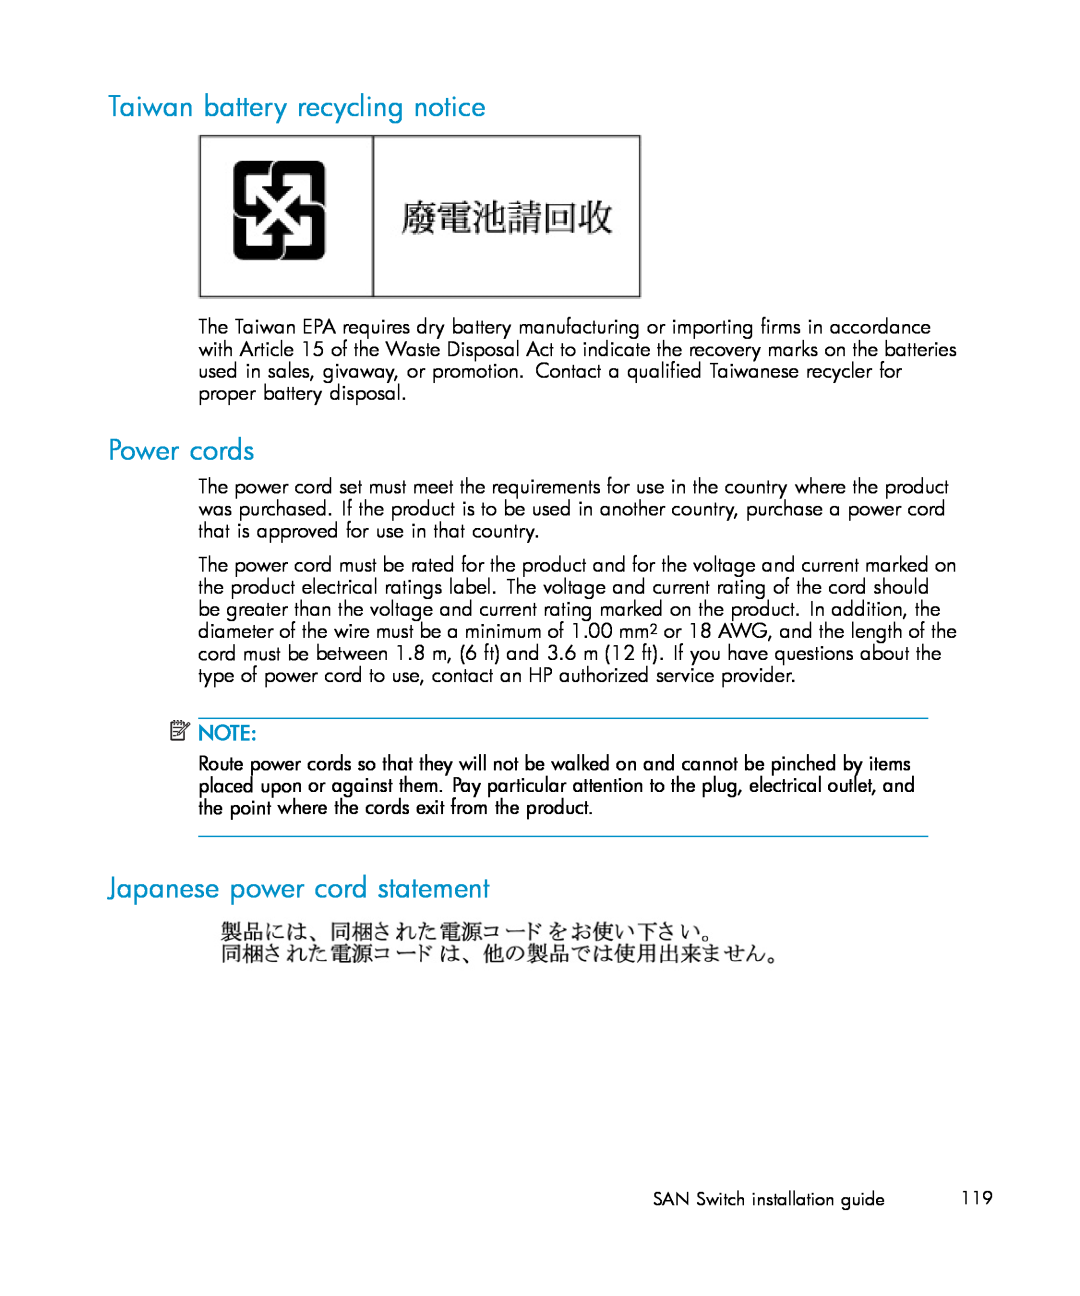 IBM AA-RWF3A-TE manual Taiwan battery recycling notice, Power cords, Japanese power cord statement 